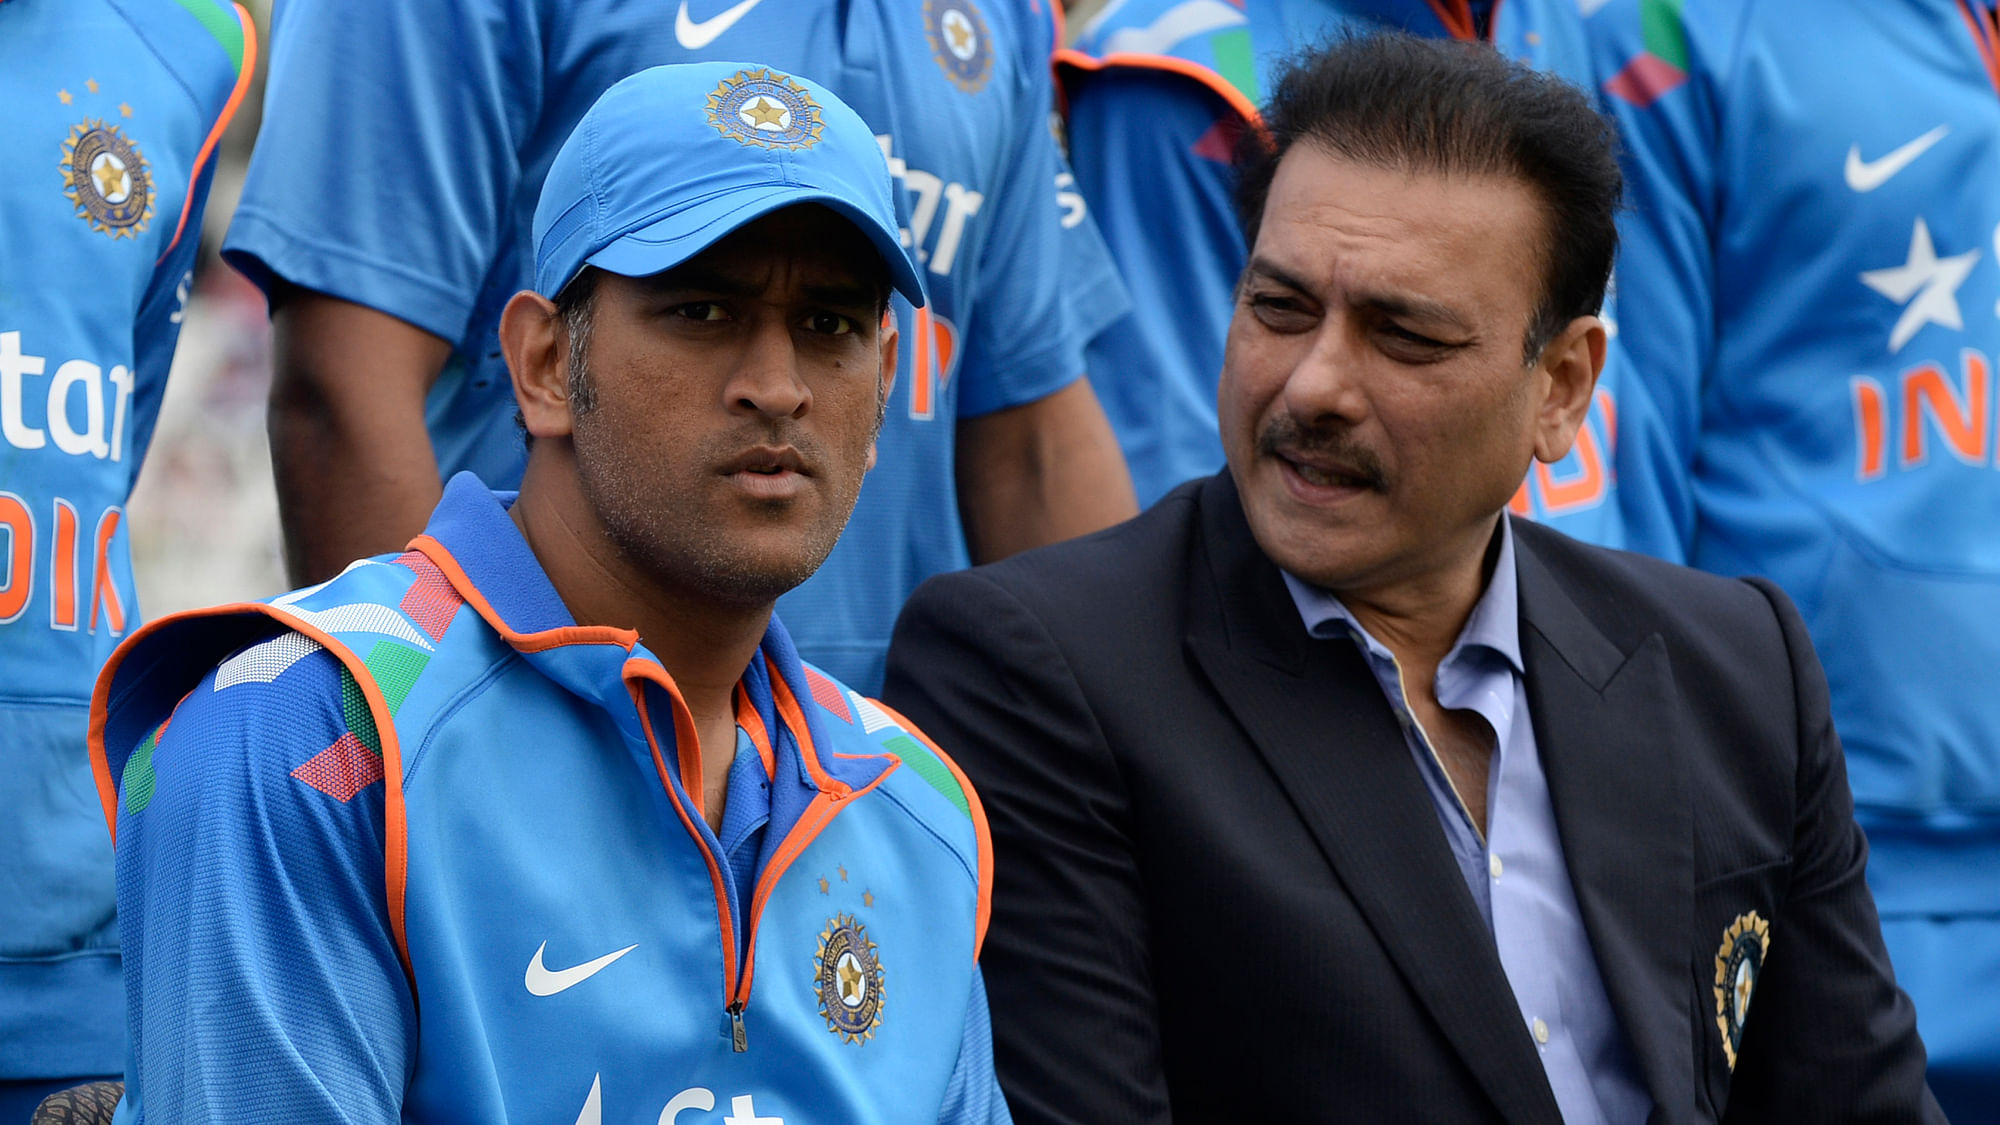 Ravi Shastri has called MS Dhoni  “a once in 40 years player”.